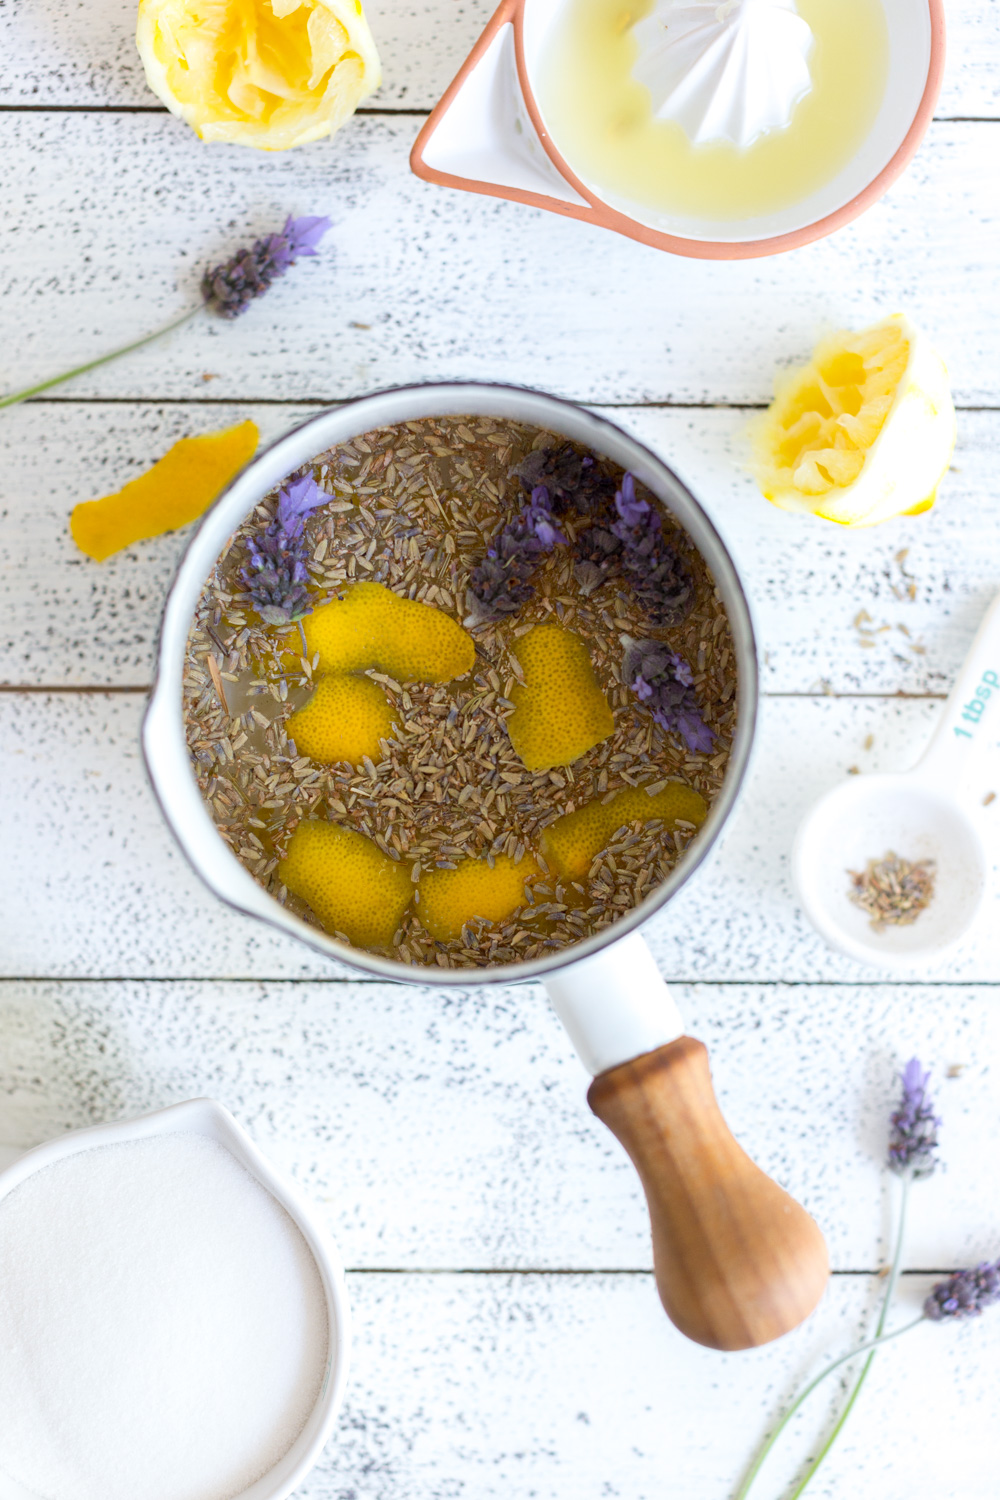 Making lavender simple syrup by Baking The Goods